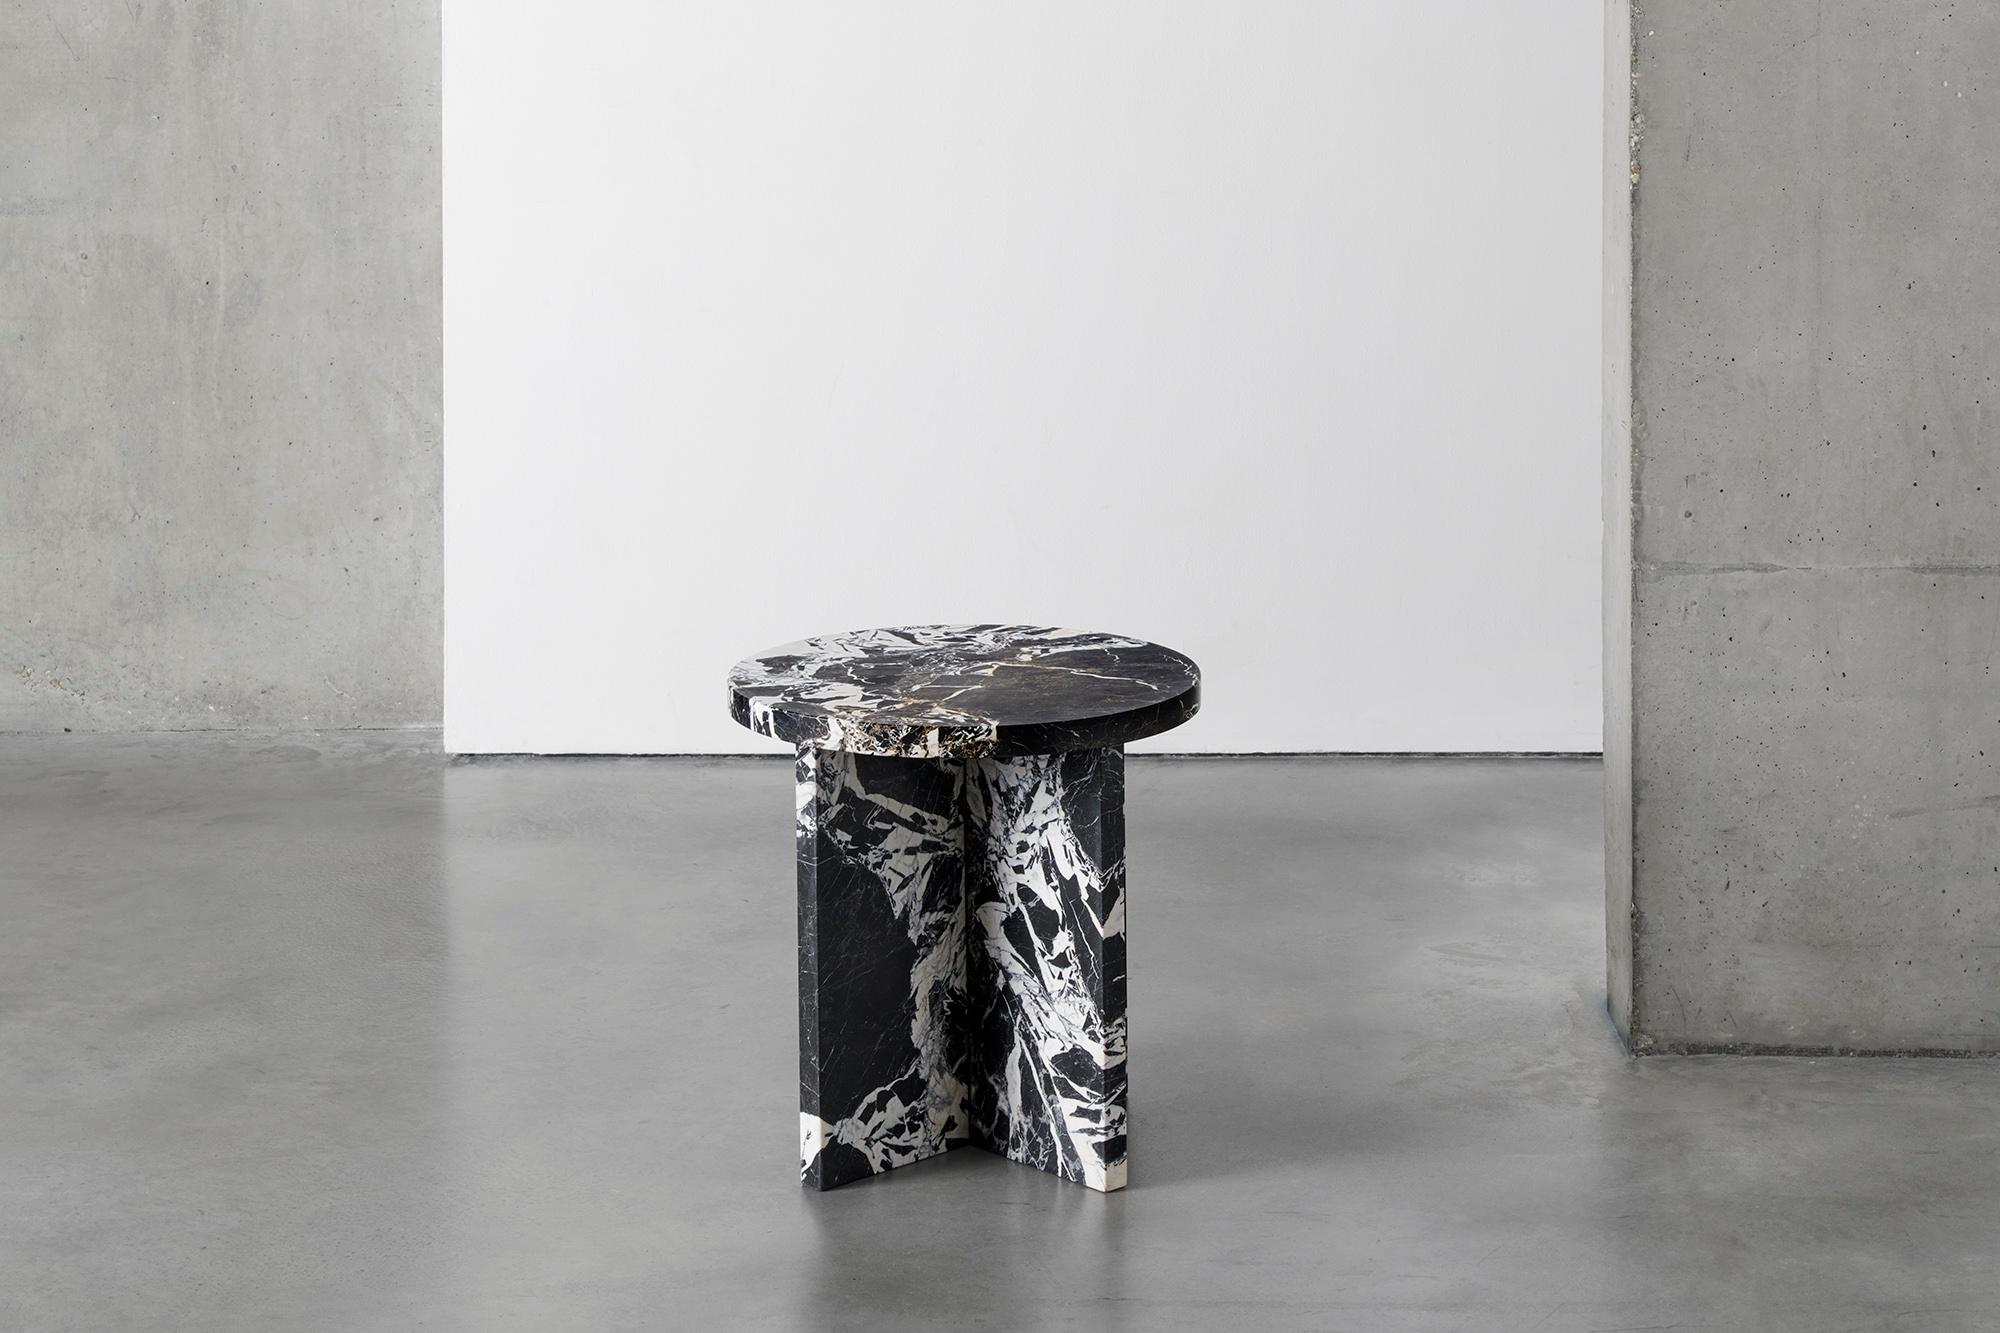 Rosa marble side table by Agglomerati.
Dimensions: D 45 x H 45 cm.
Materials: Nero Antico marble.
Available in other stones.

Rosa side table celebrates simplicity. It has striking geometric proportions that create a harmonious